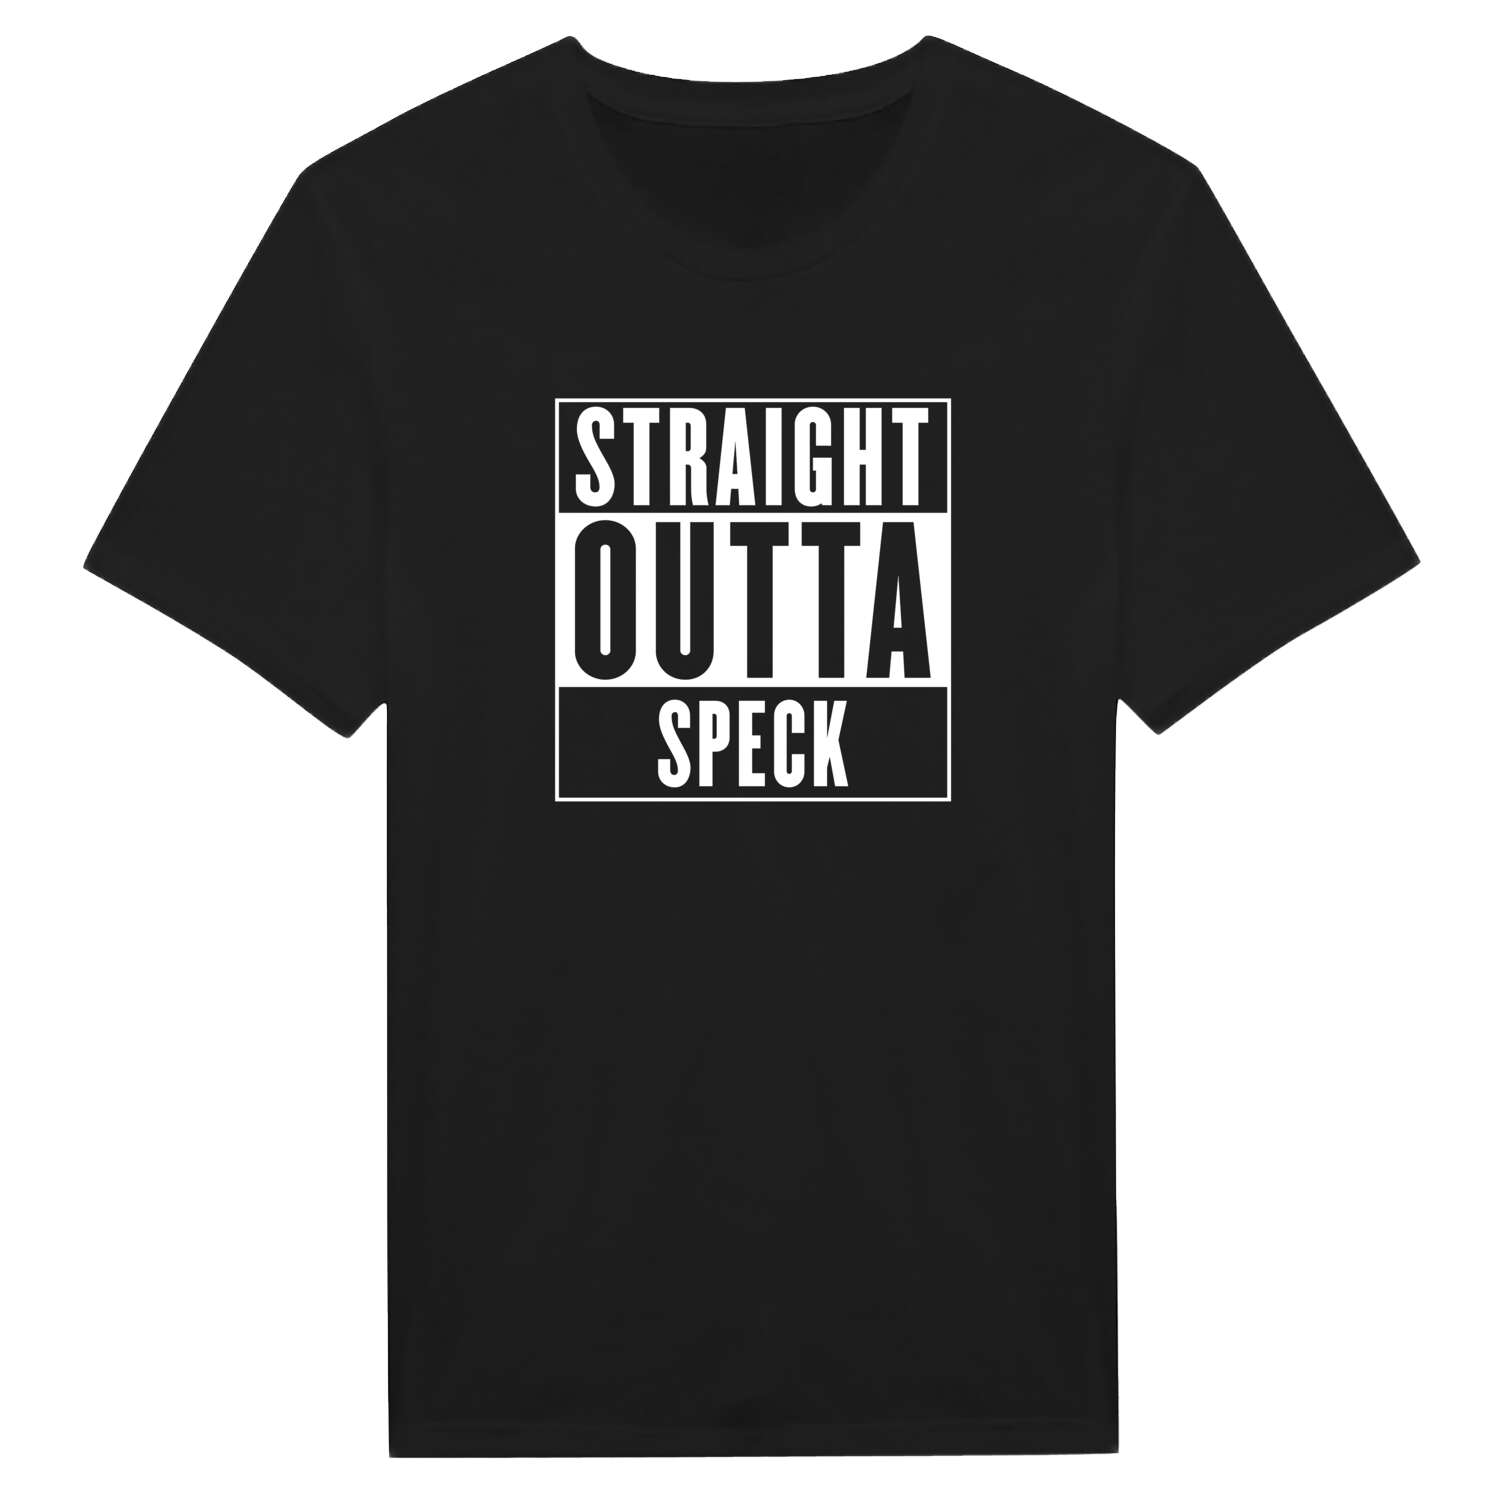 Speck T-Shirt »Straight Outta«